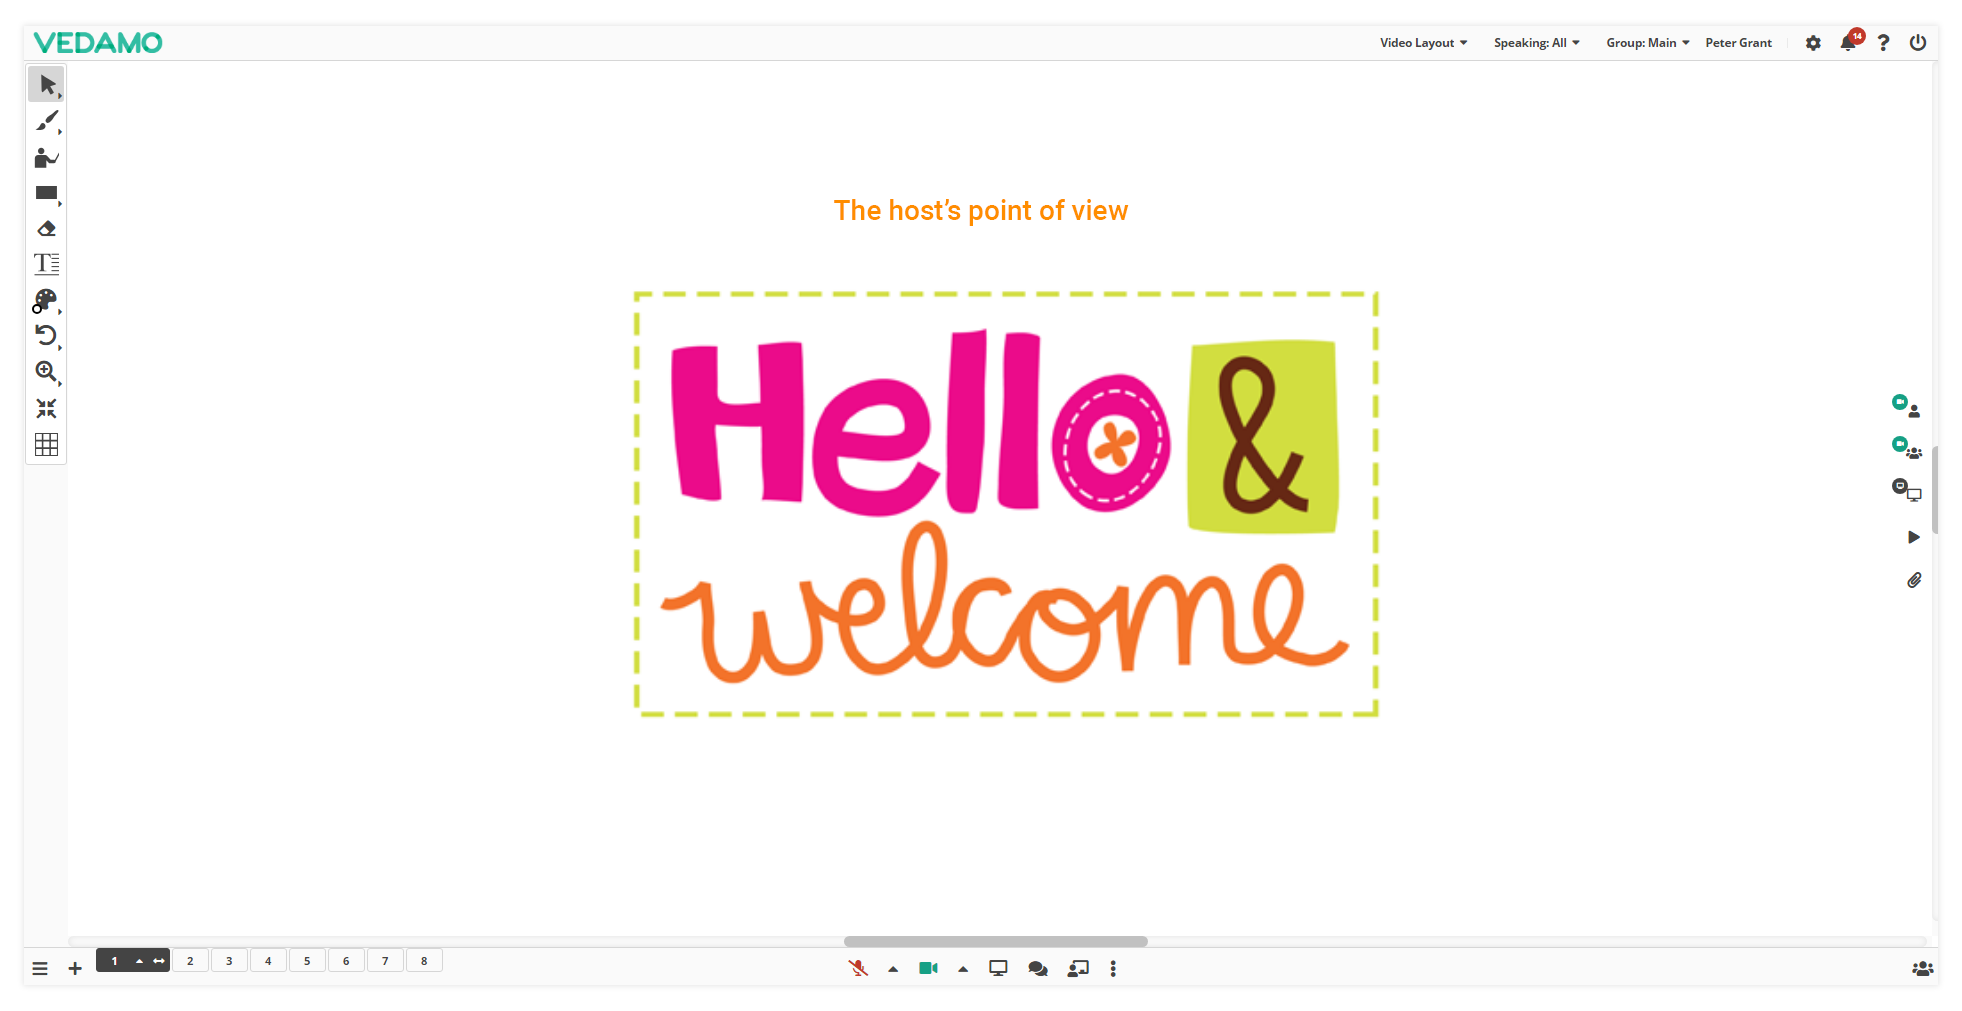 Online Whiteboard Settings: Online Whiteboard Settings: The host’s point of view.